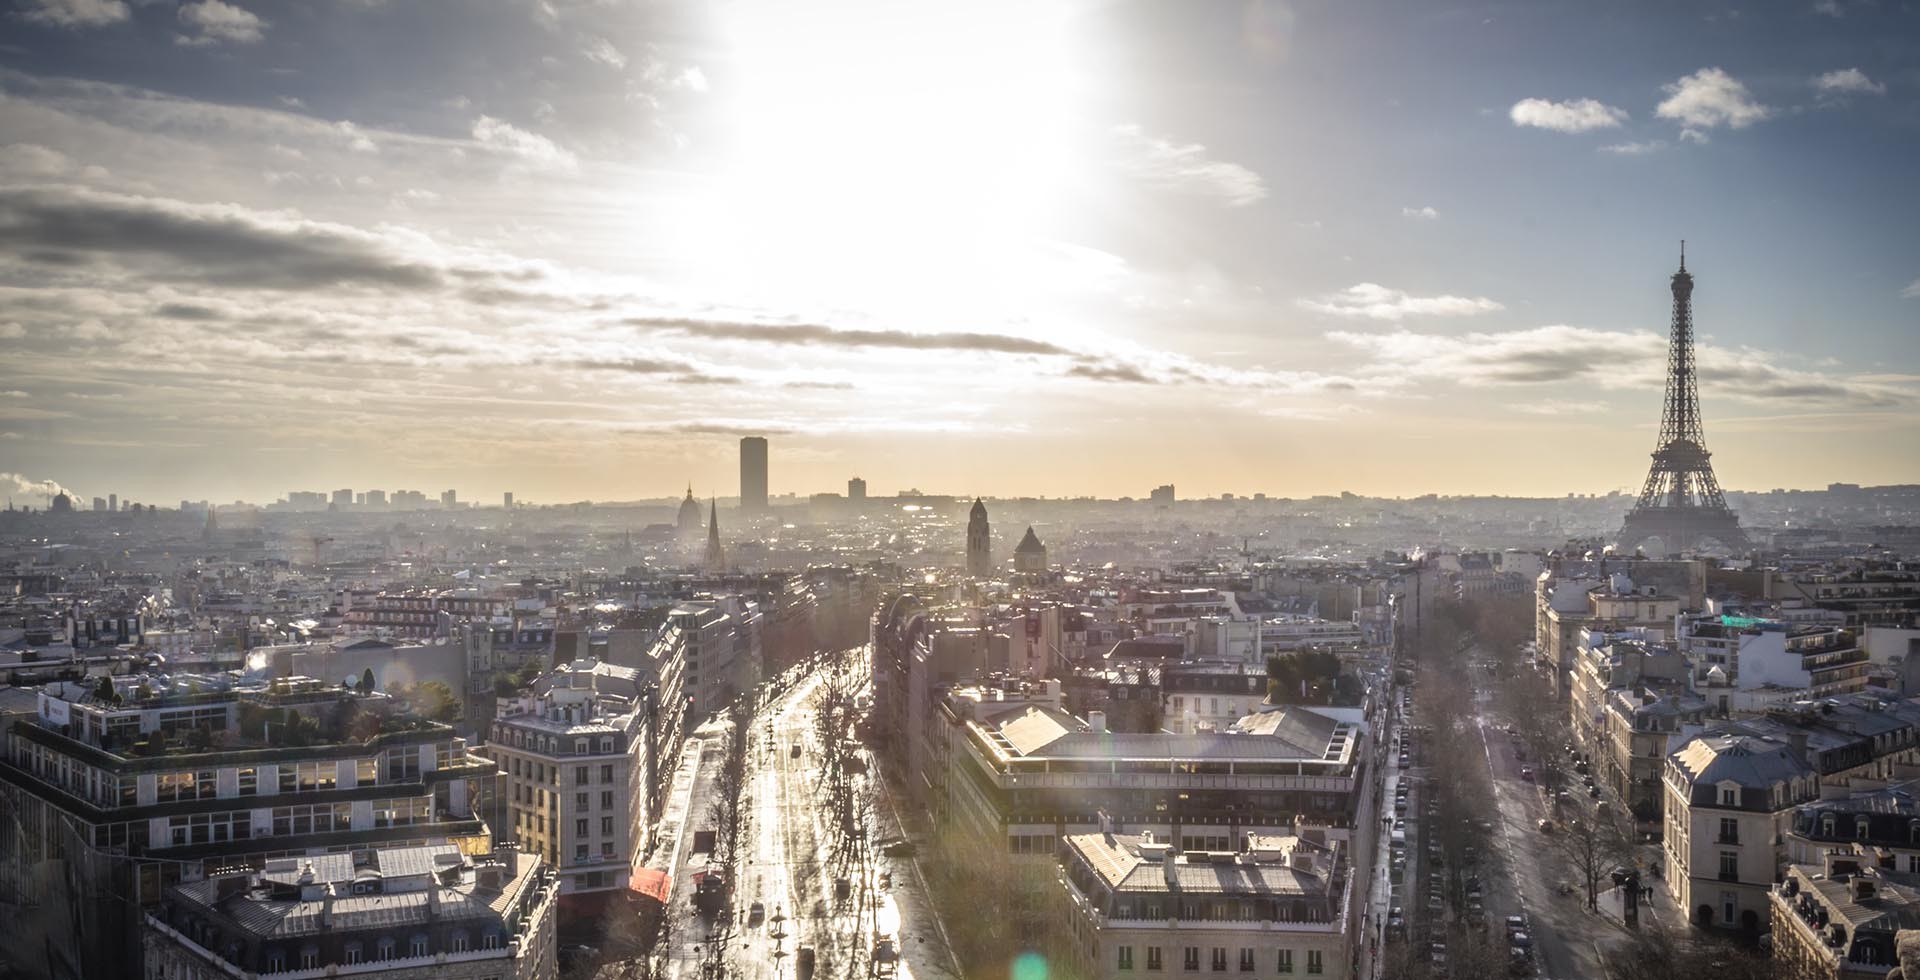 Paris wants to become a “15-minute city”